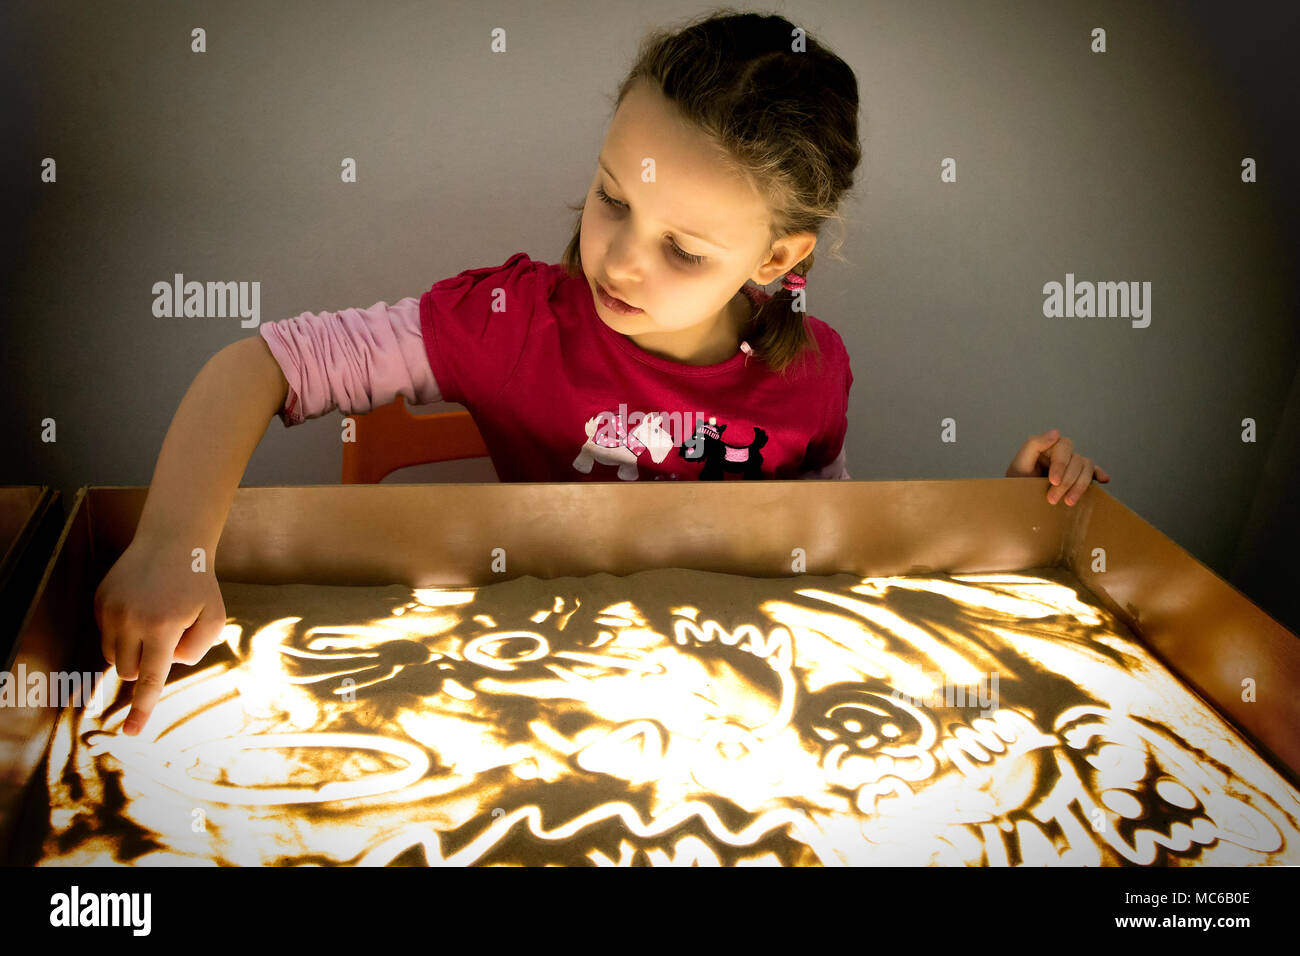 Child girl draws with sand on a light table. Stock Photo